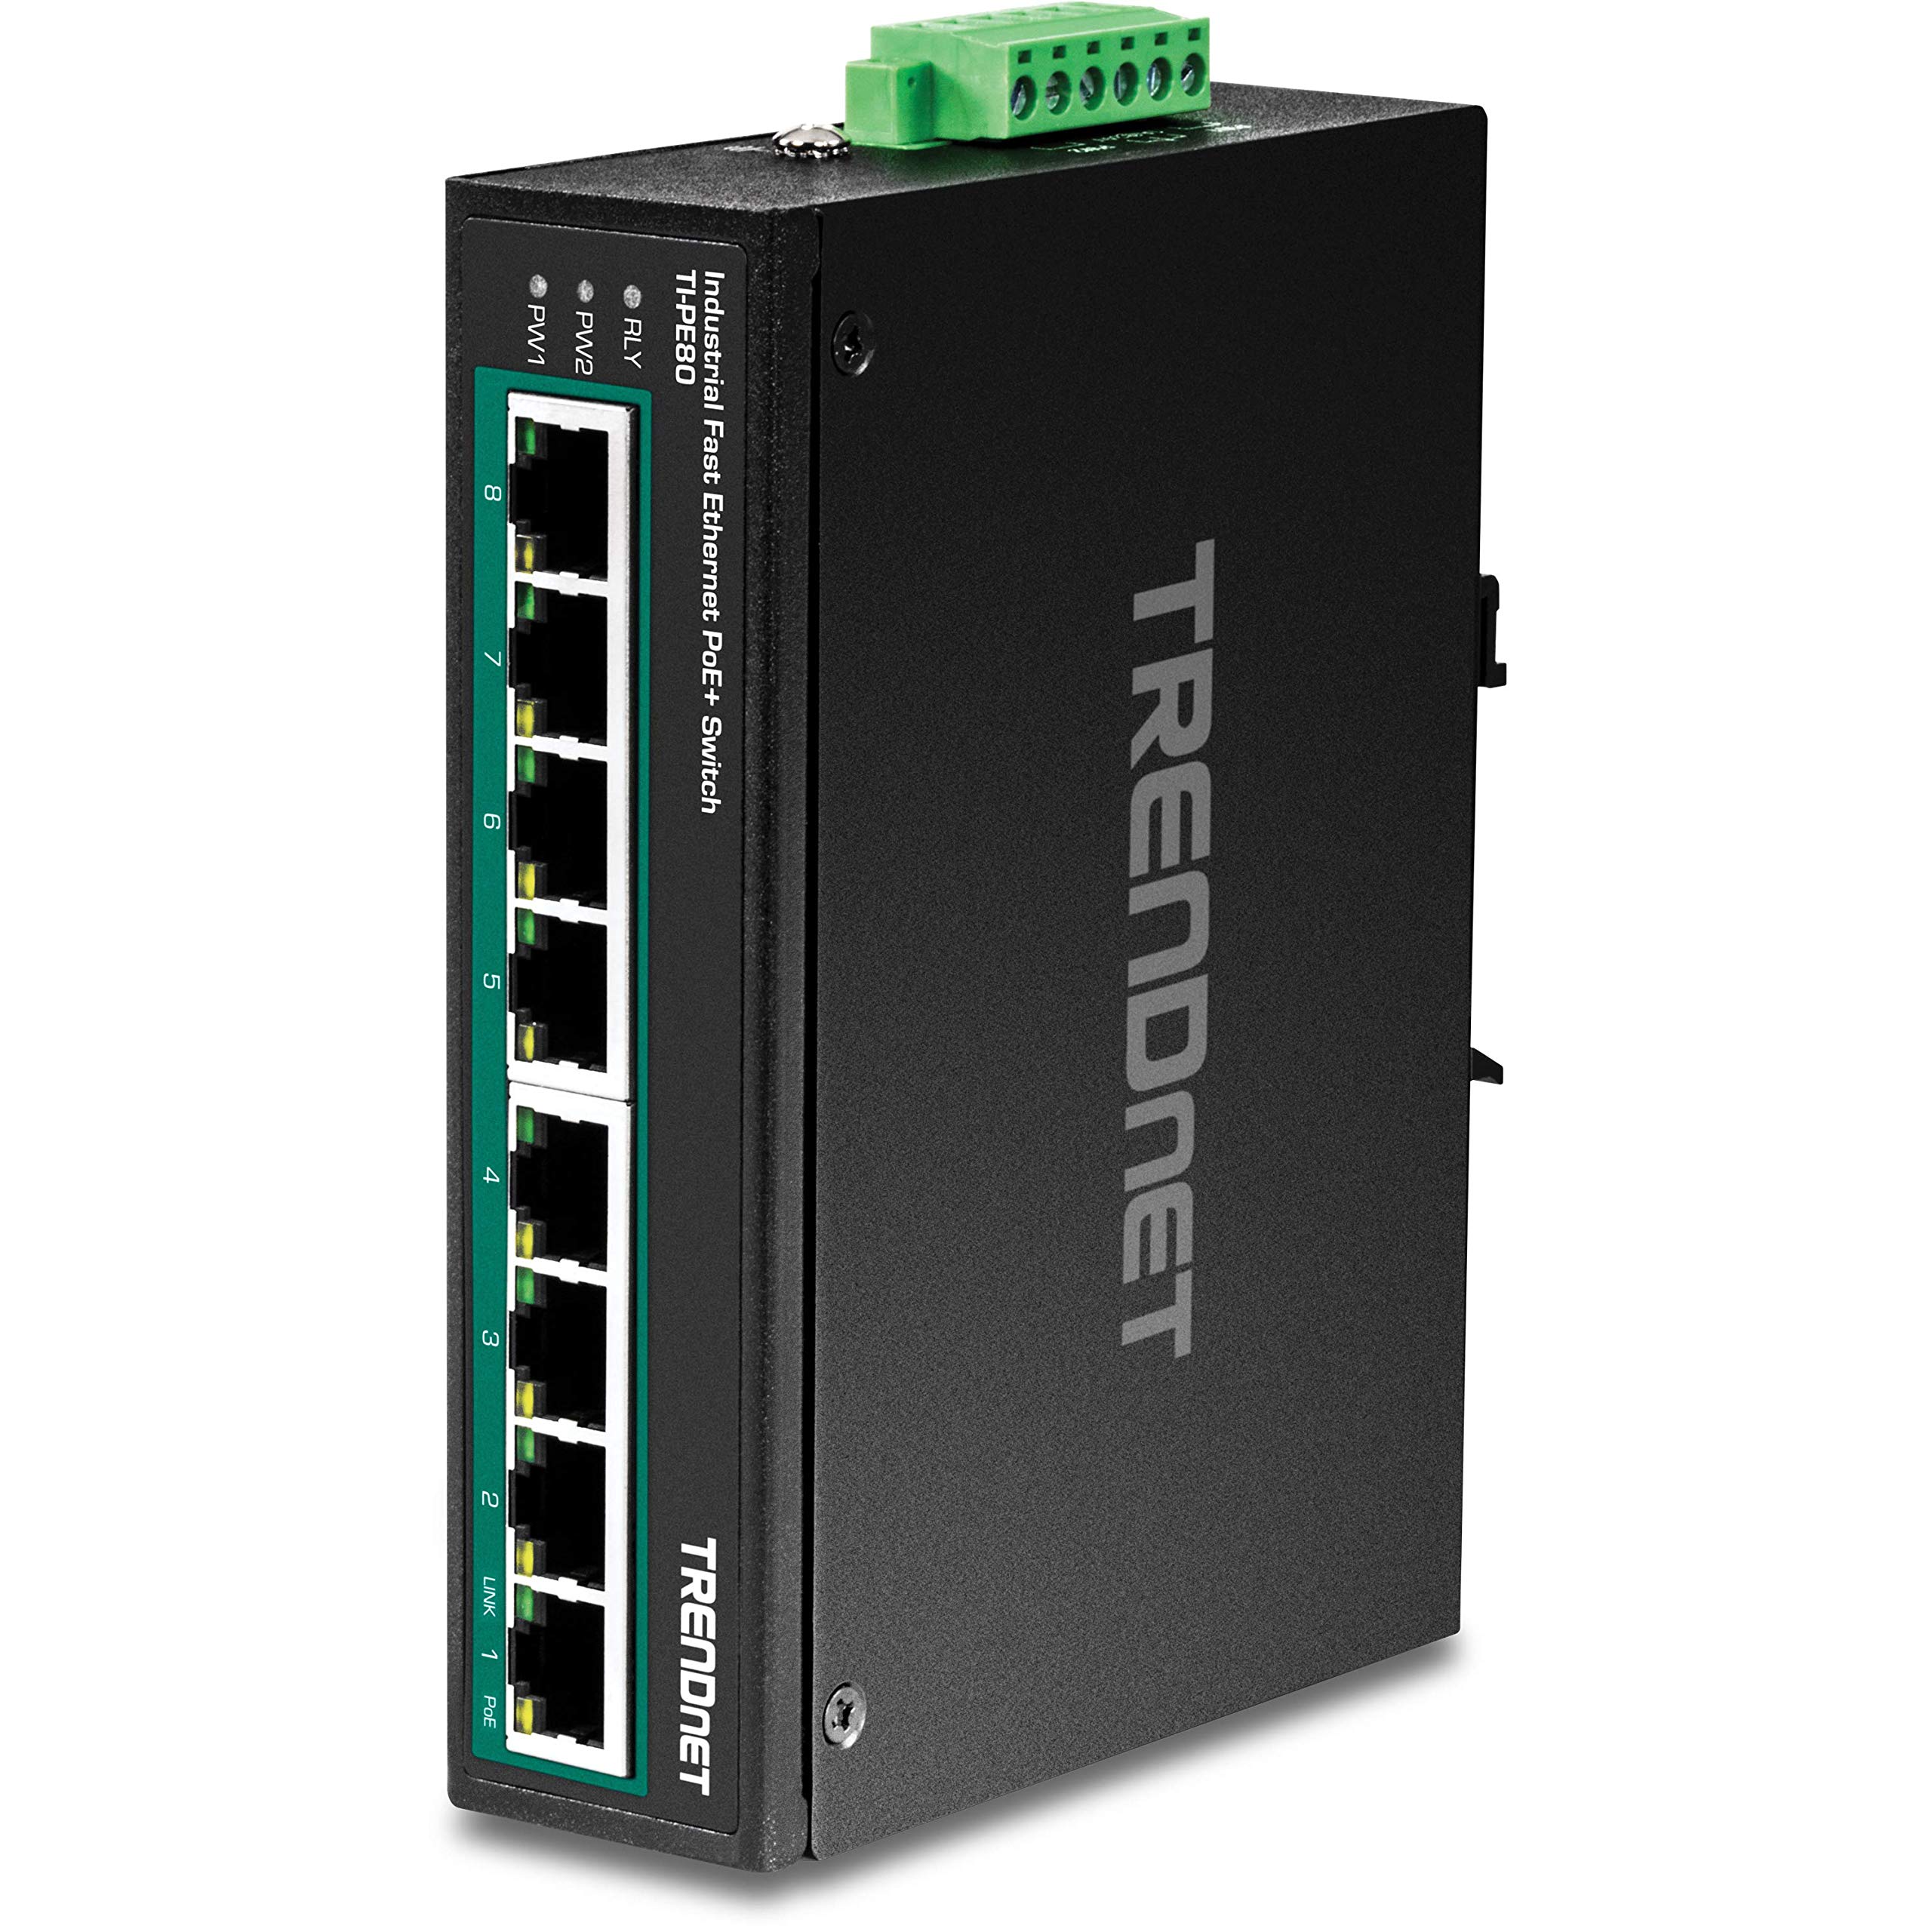 8-PORT IND.FAST ETH POE+ SWITCH